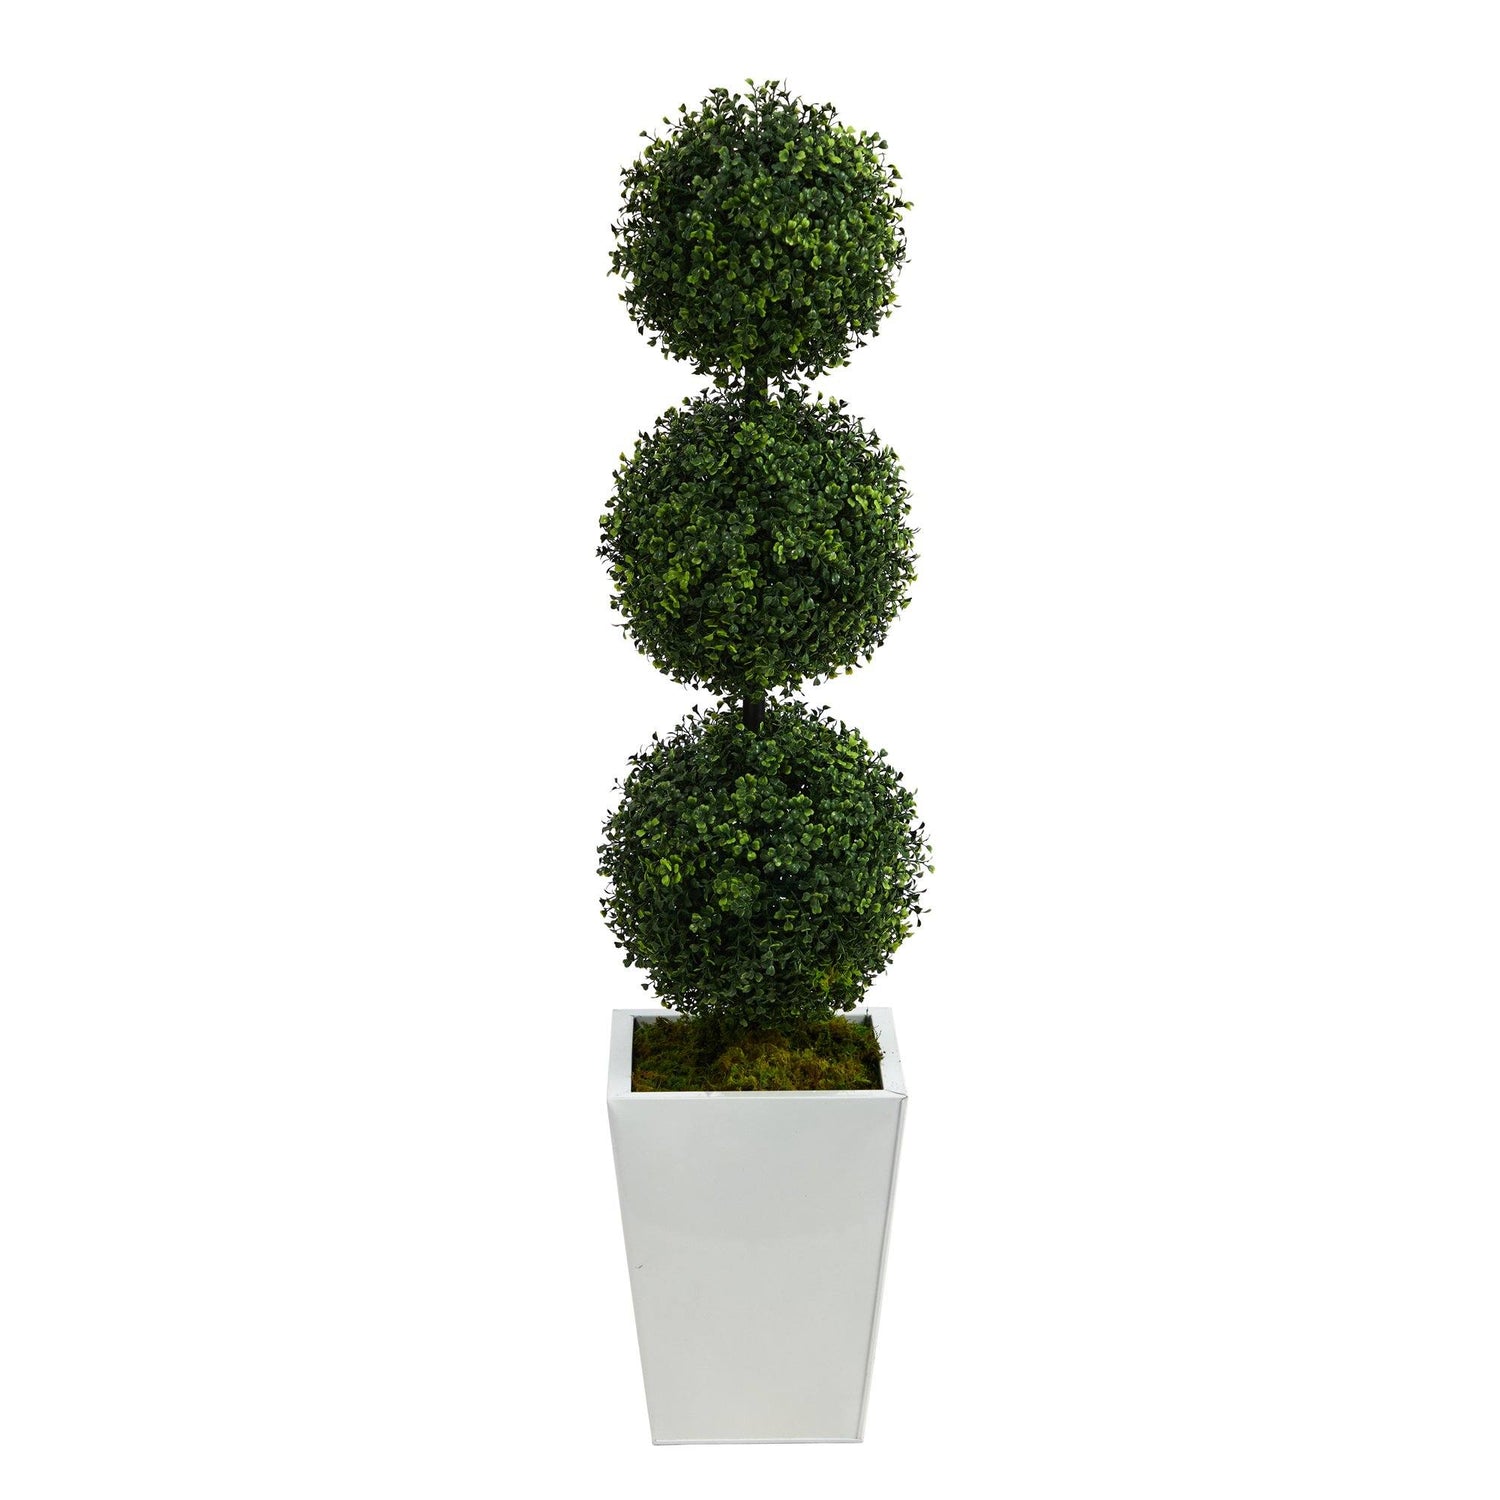 46” Boxwood Triple Ball Topiary Artificial Tree in White Metal Planter (Indoor/Outdoor)